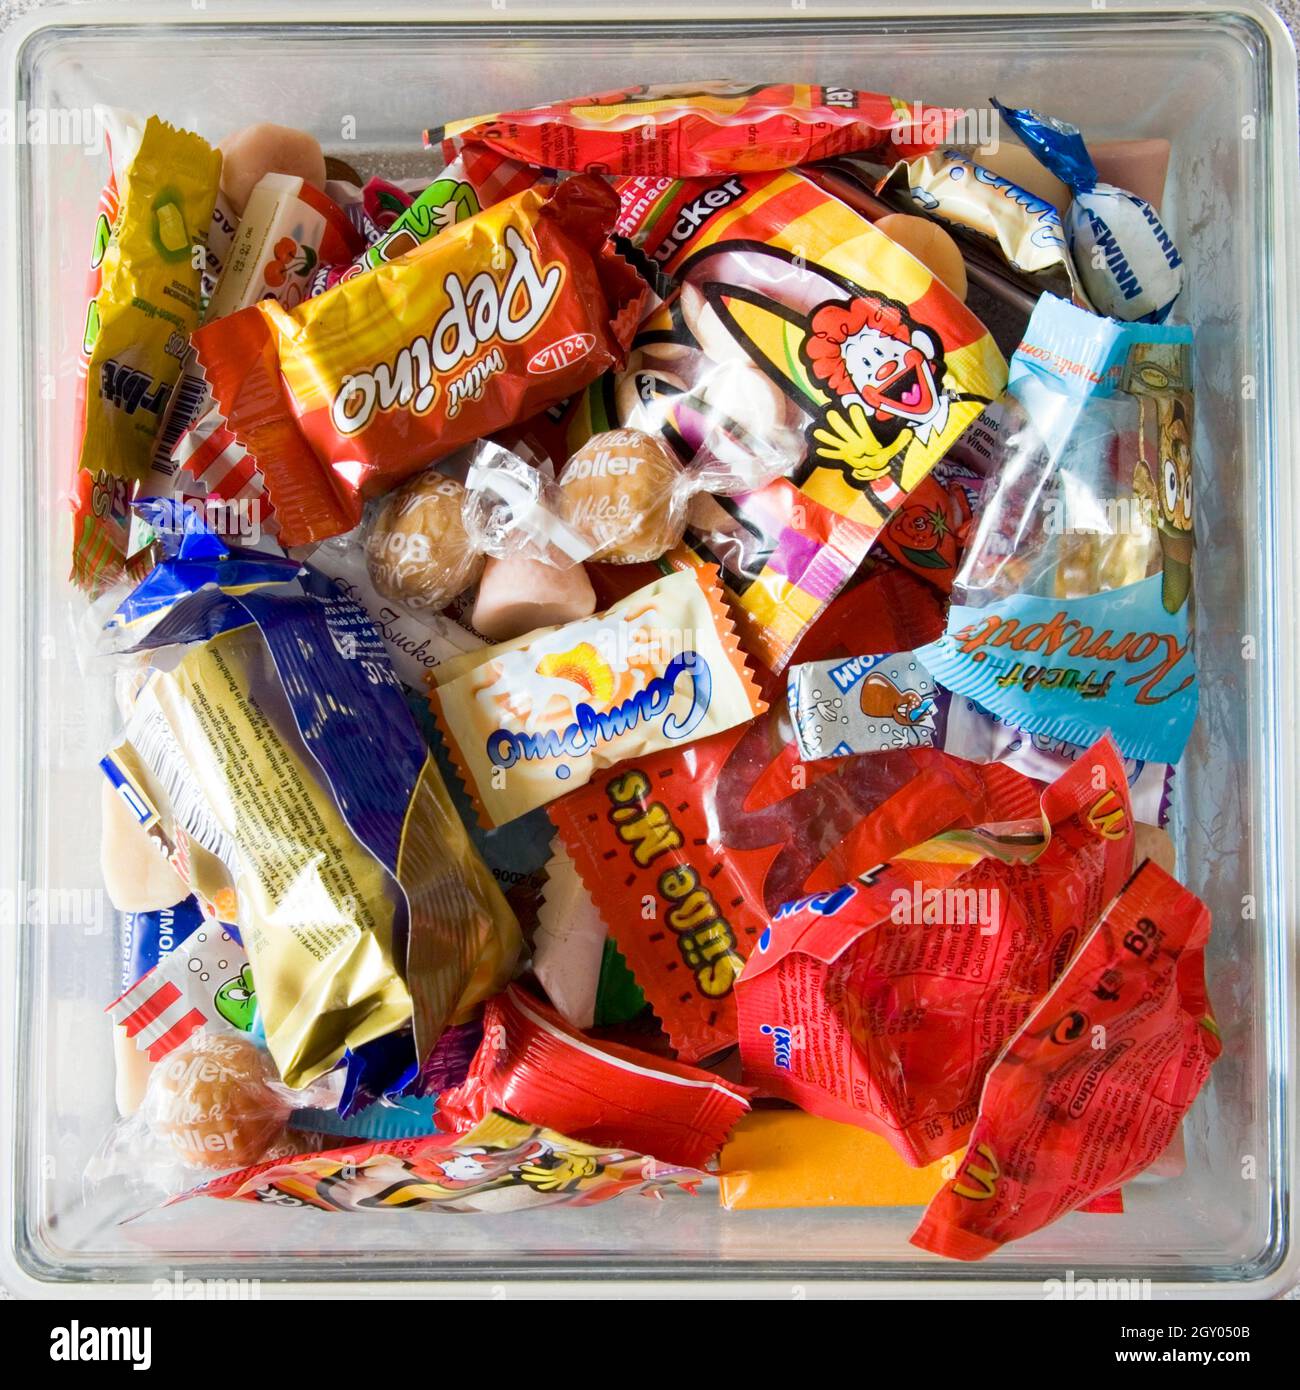 sweets in a box Stock Photo